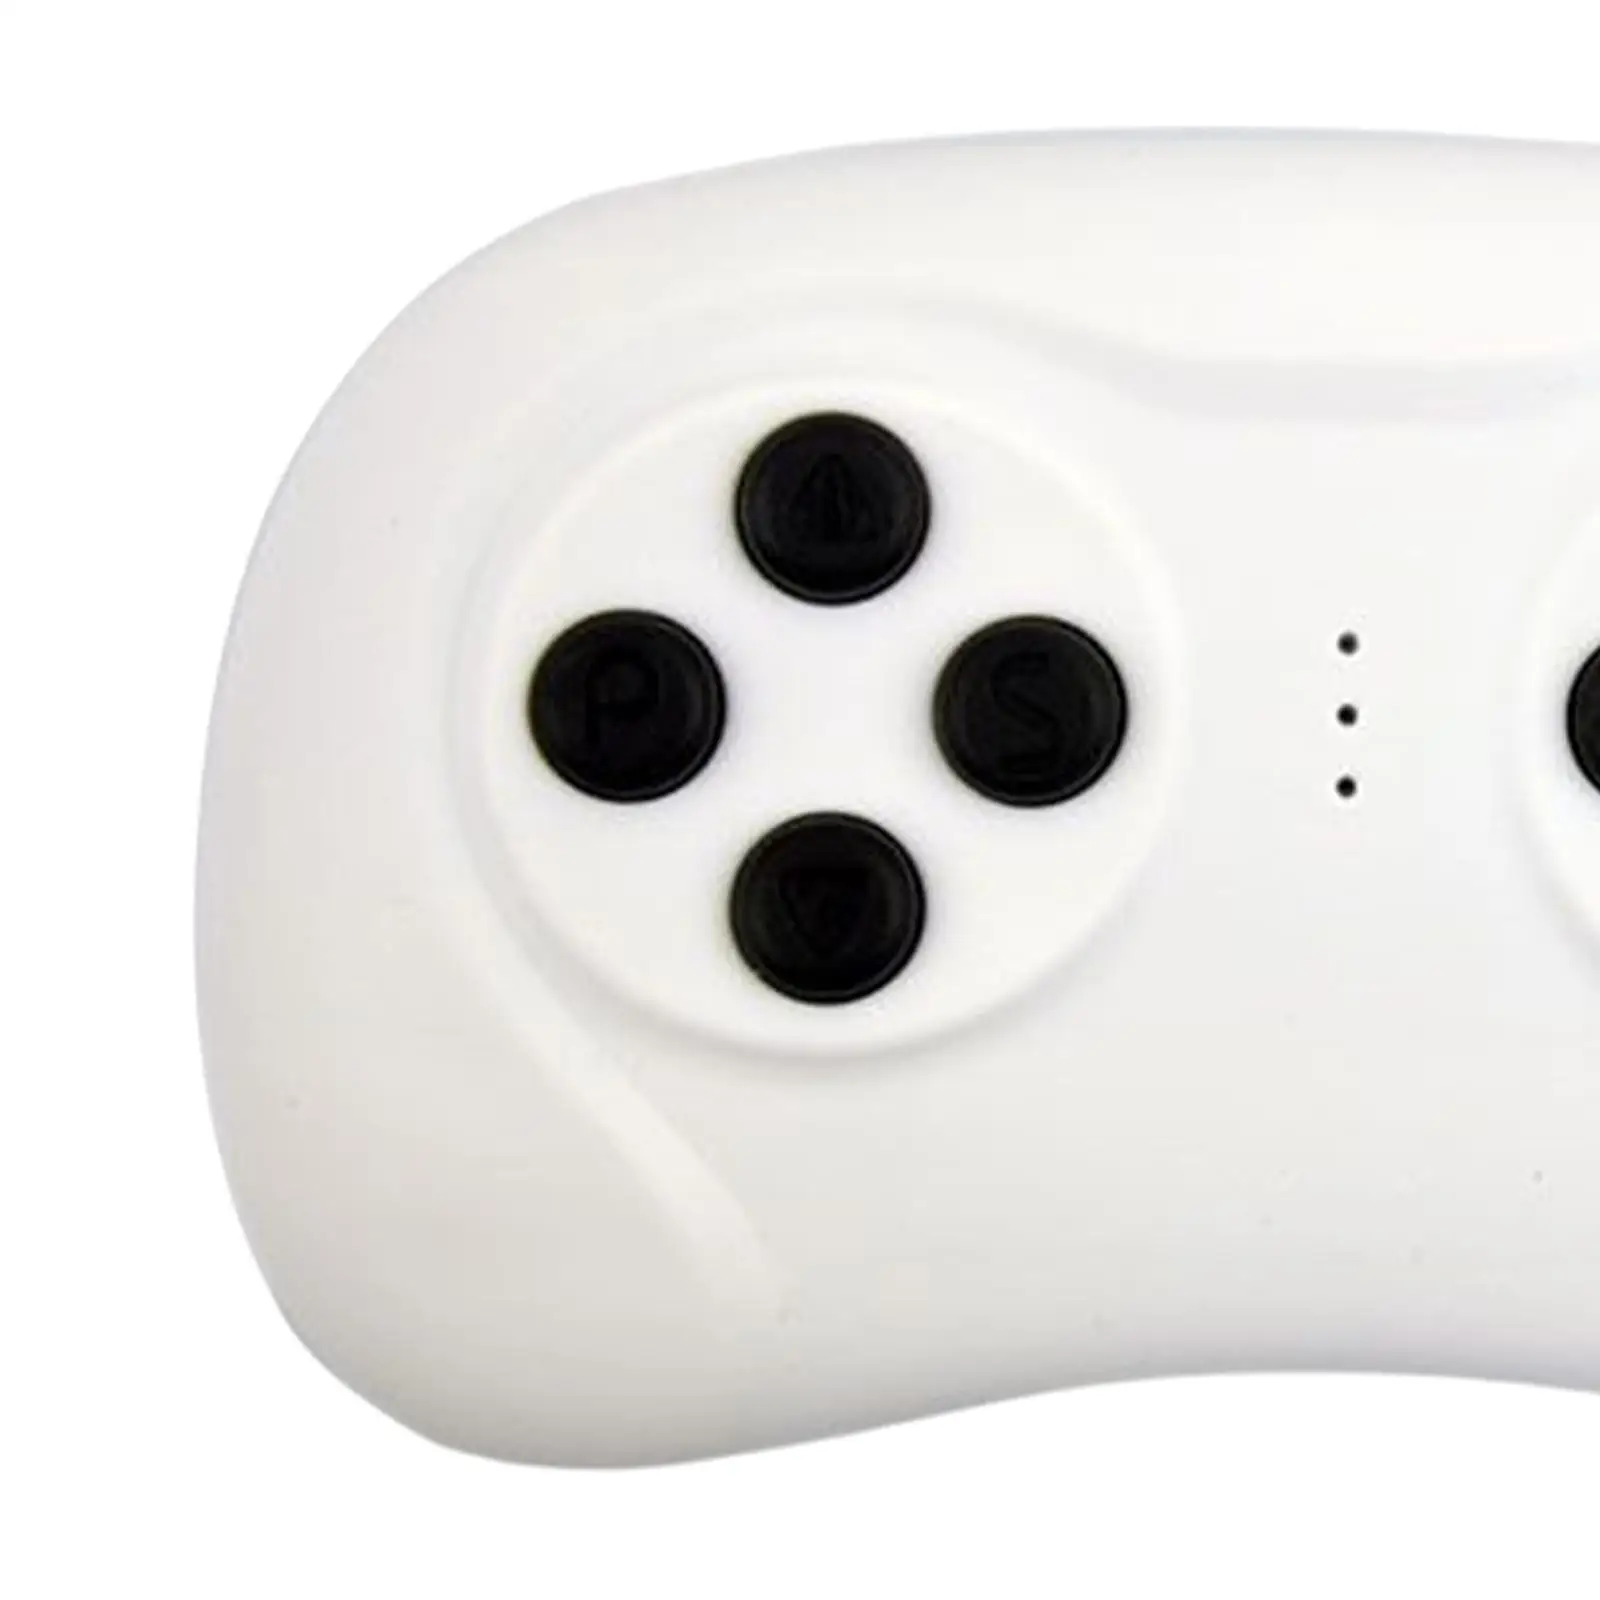 2.4G Bluetooth Remote Control Smooth Start Controller for Tricycles